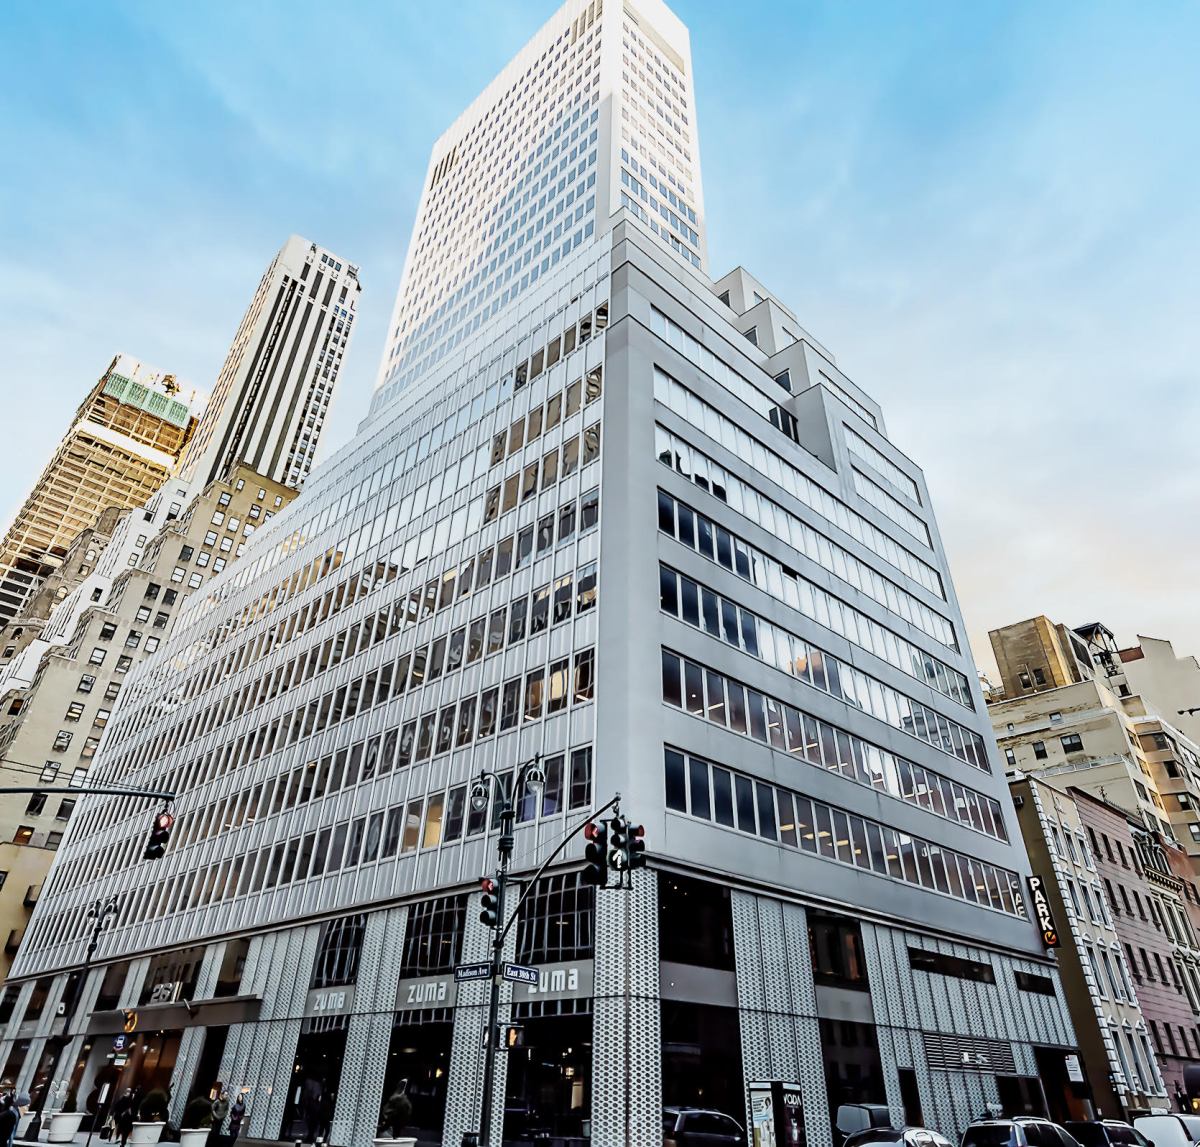 Industrious Signs New Location at Sapir Organization’s 261 Madison Avenue